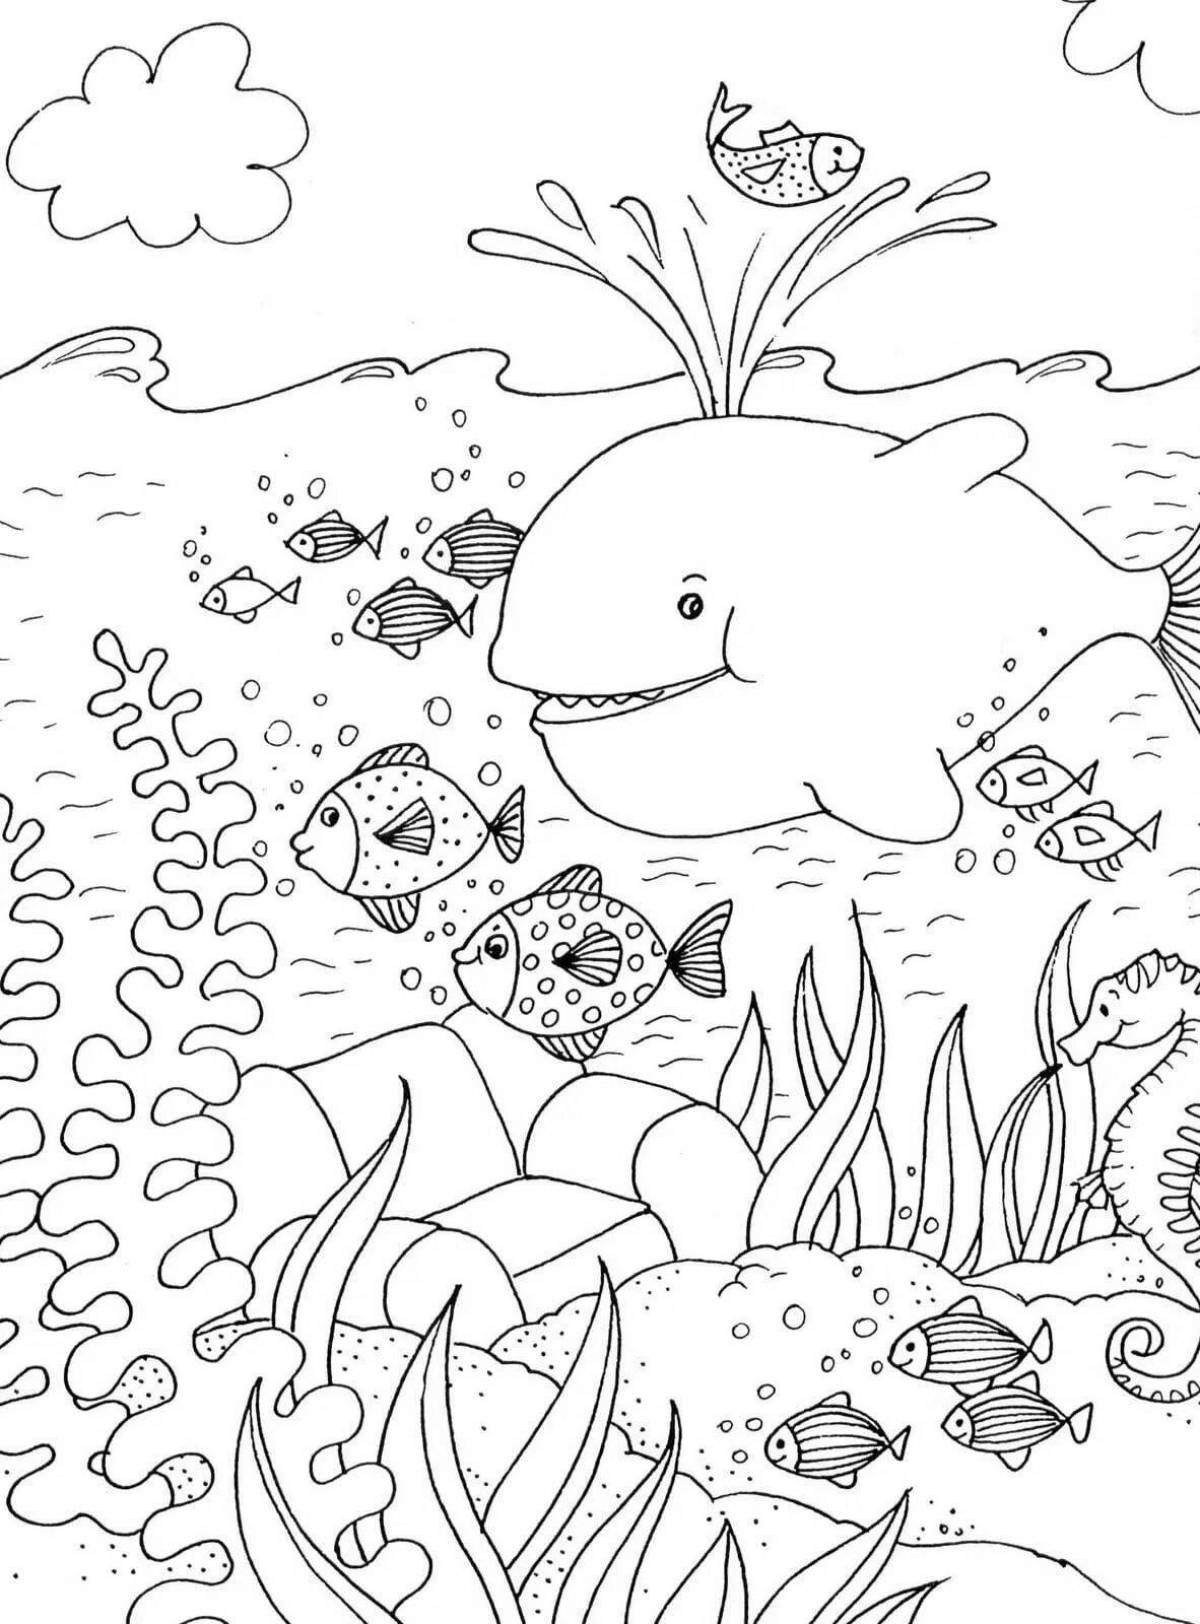 Coloring page charming water world